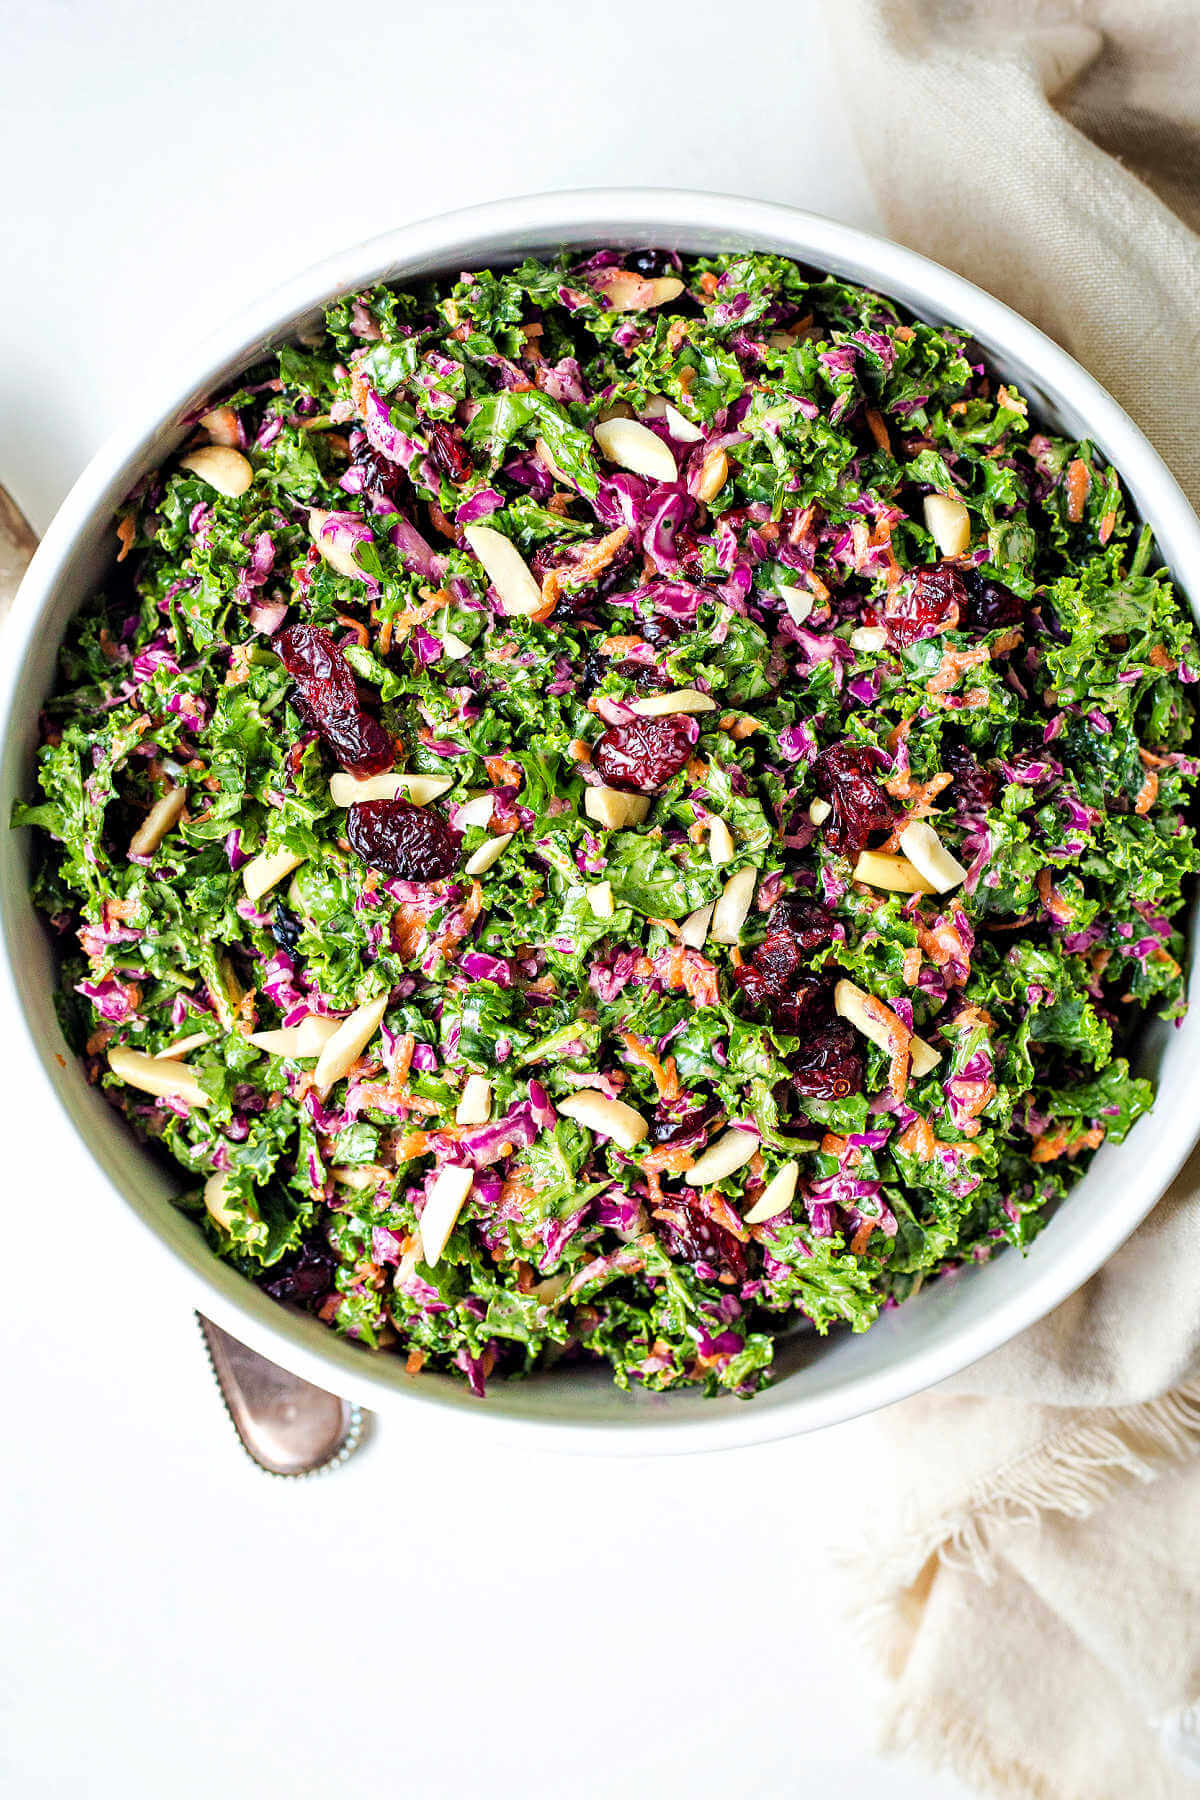 kale slaw with purple cabbage, carrots, dried cranberries, and slivered almonds in a white bowl on a table.